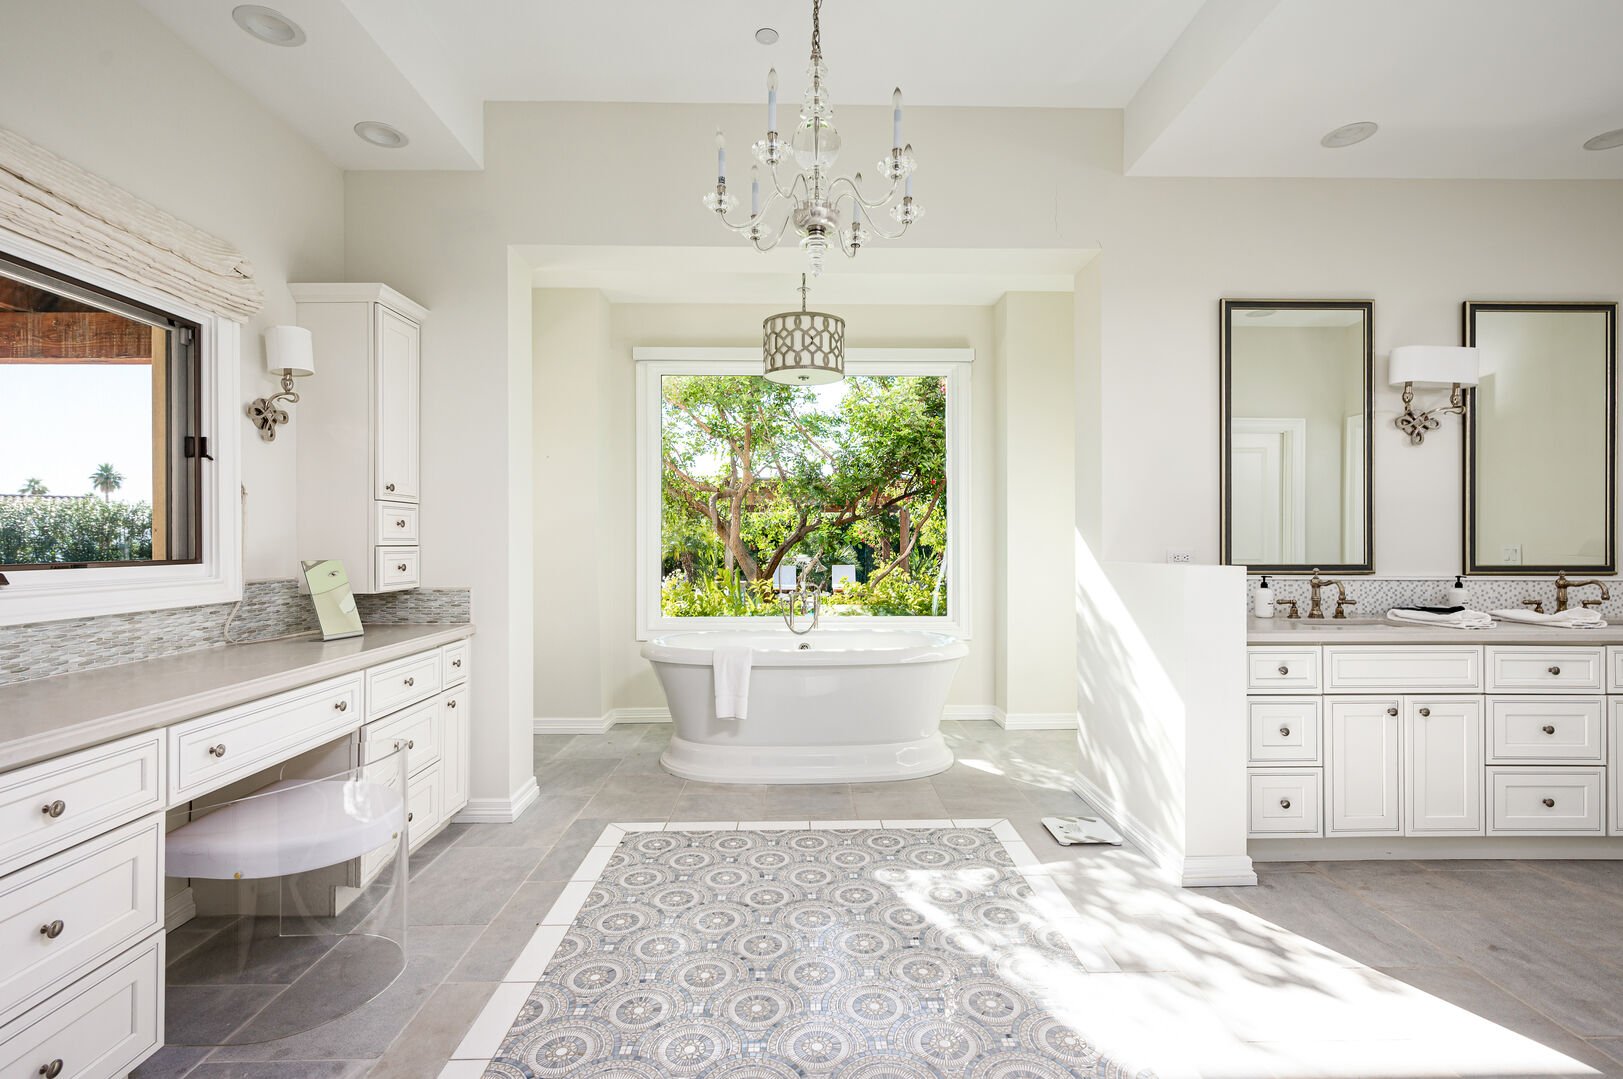 Master bathroom fit for royalty. There is a vanity space to prepare for the day and a large soaking tub.